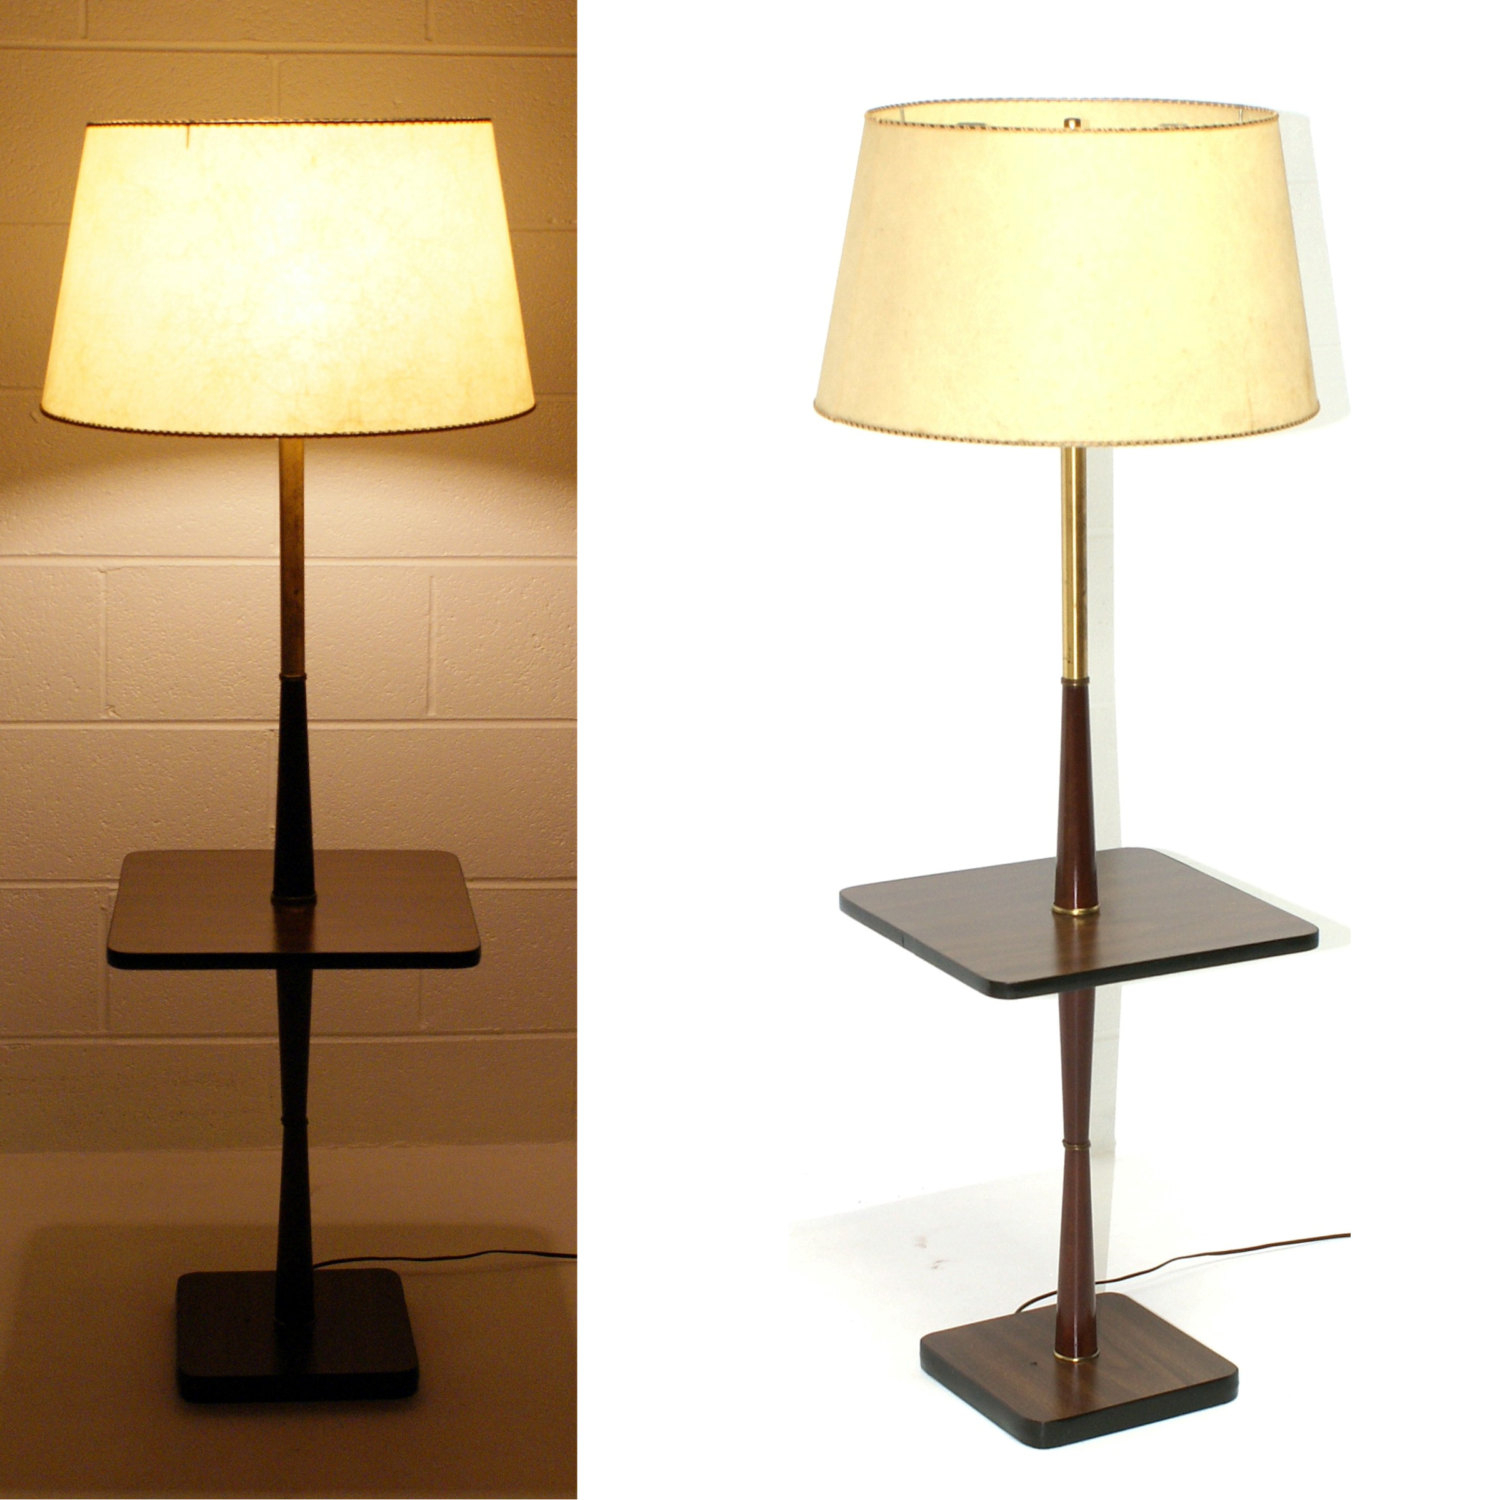 Side Tables With Attached Lamps Table Design Ideas in sizing 1500 X 1500.